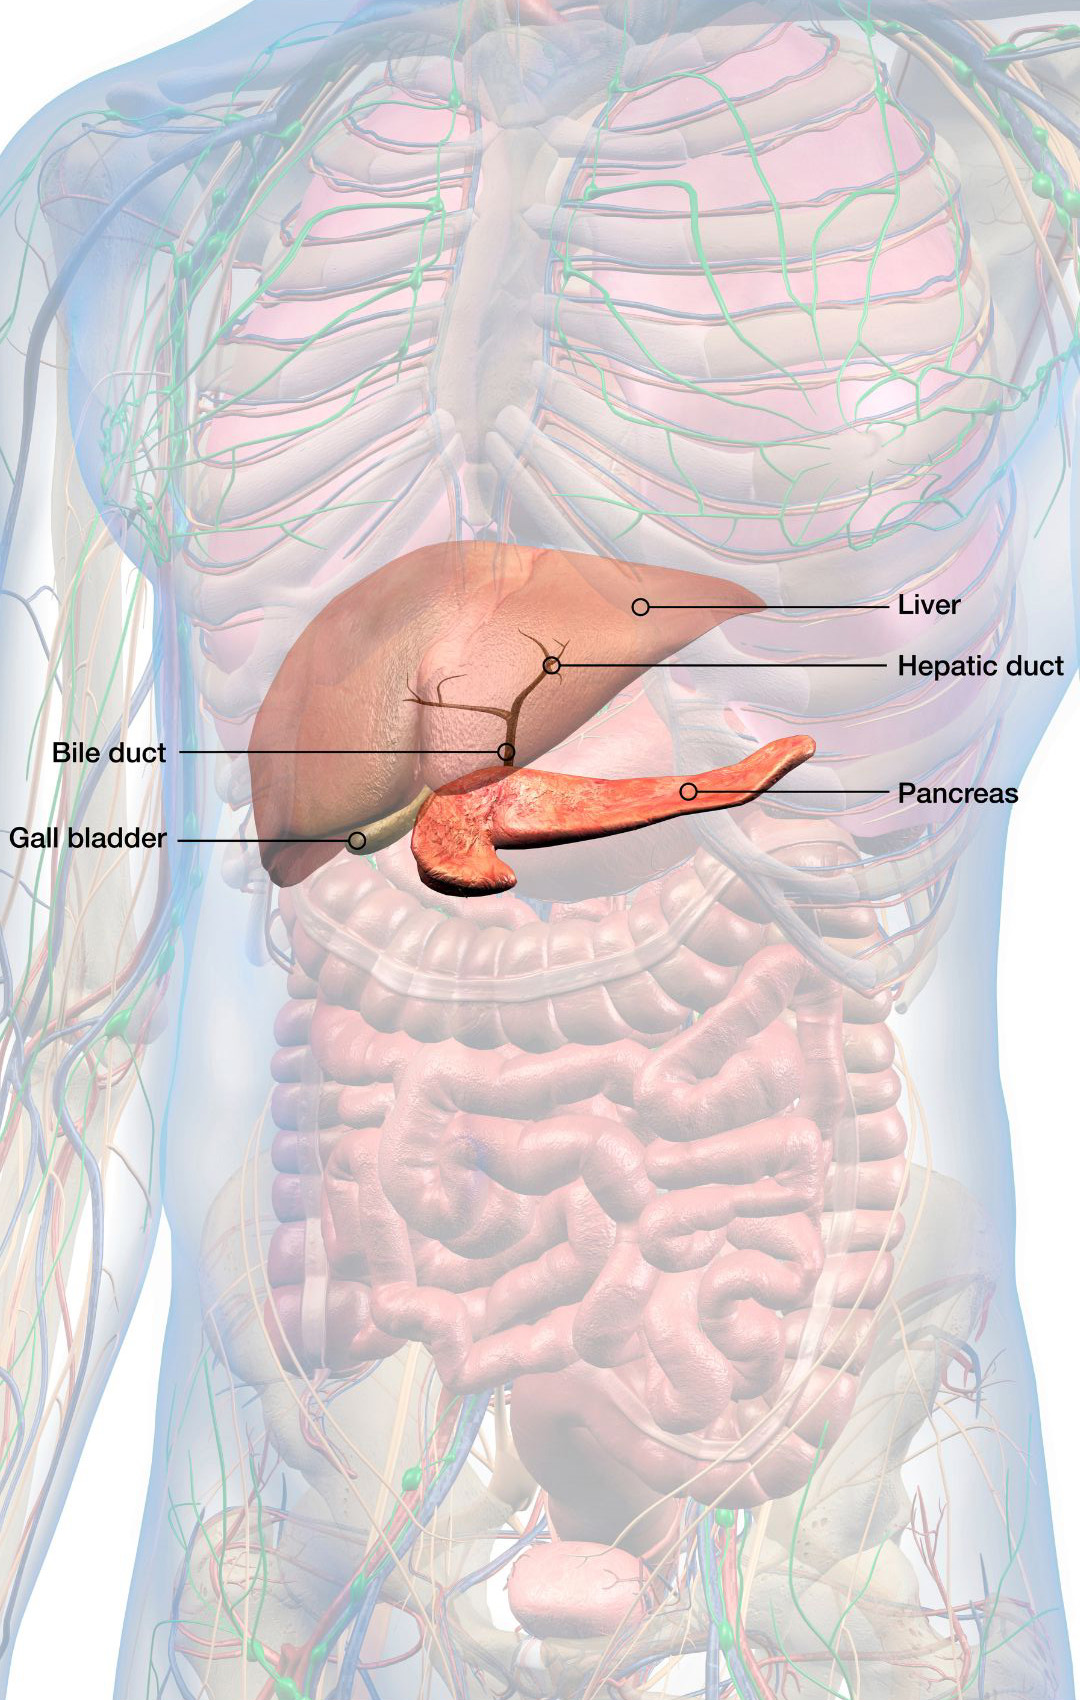 Diagram of the internal organs showing the pancreas where many have pancreatic cancer.